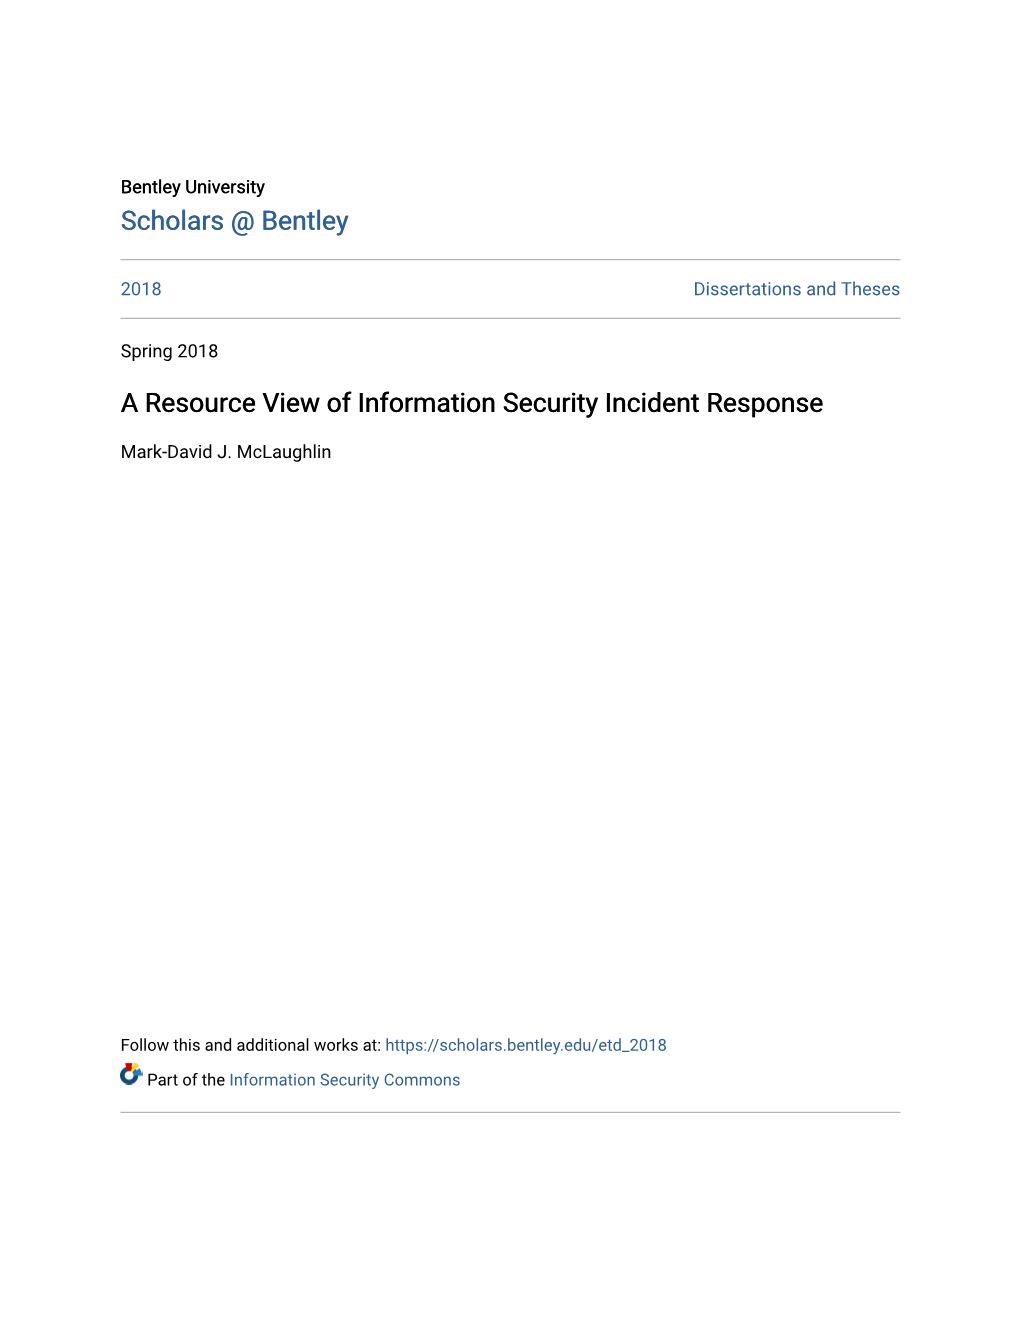 A Resource View of Information Security Incident Response